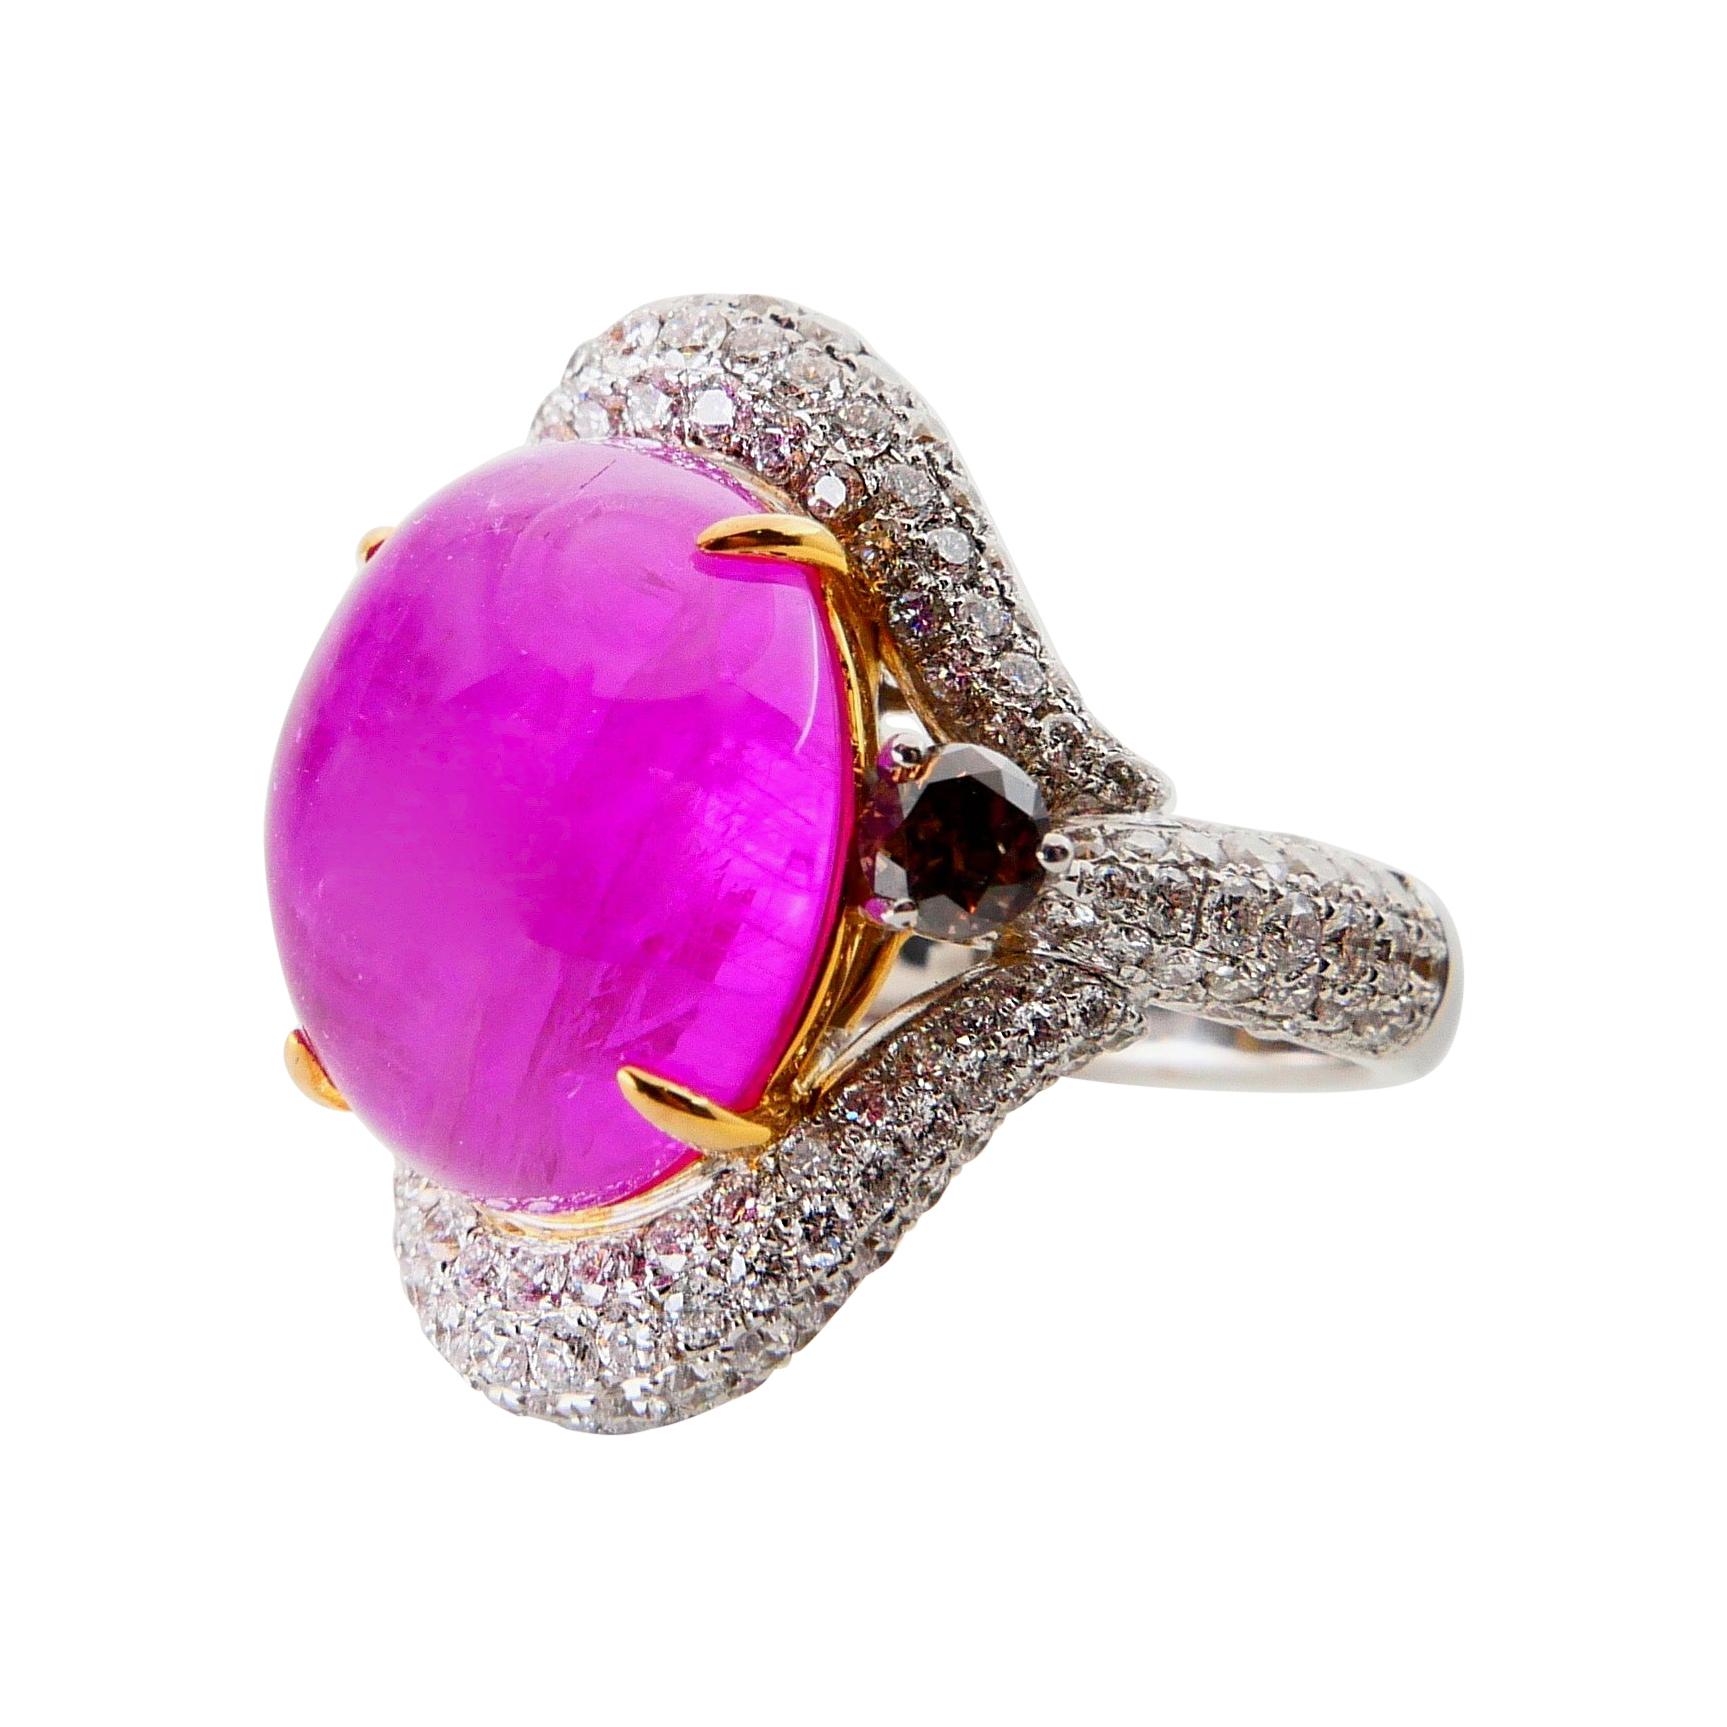 Contemporary Certified 9 Carat No Heat Pinkish Red Ruby & Fancy Cognac Diamond Cocktail Ring For Sale